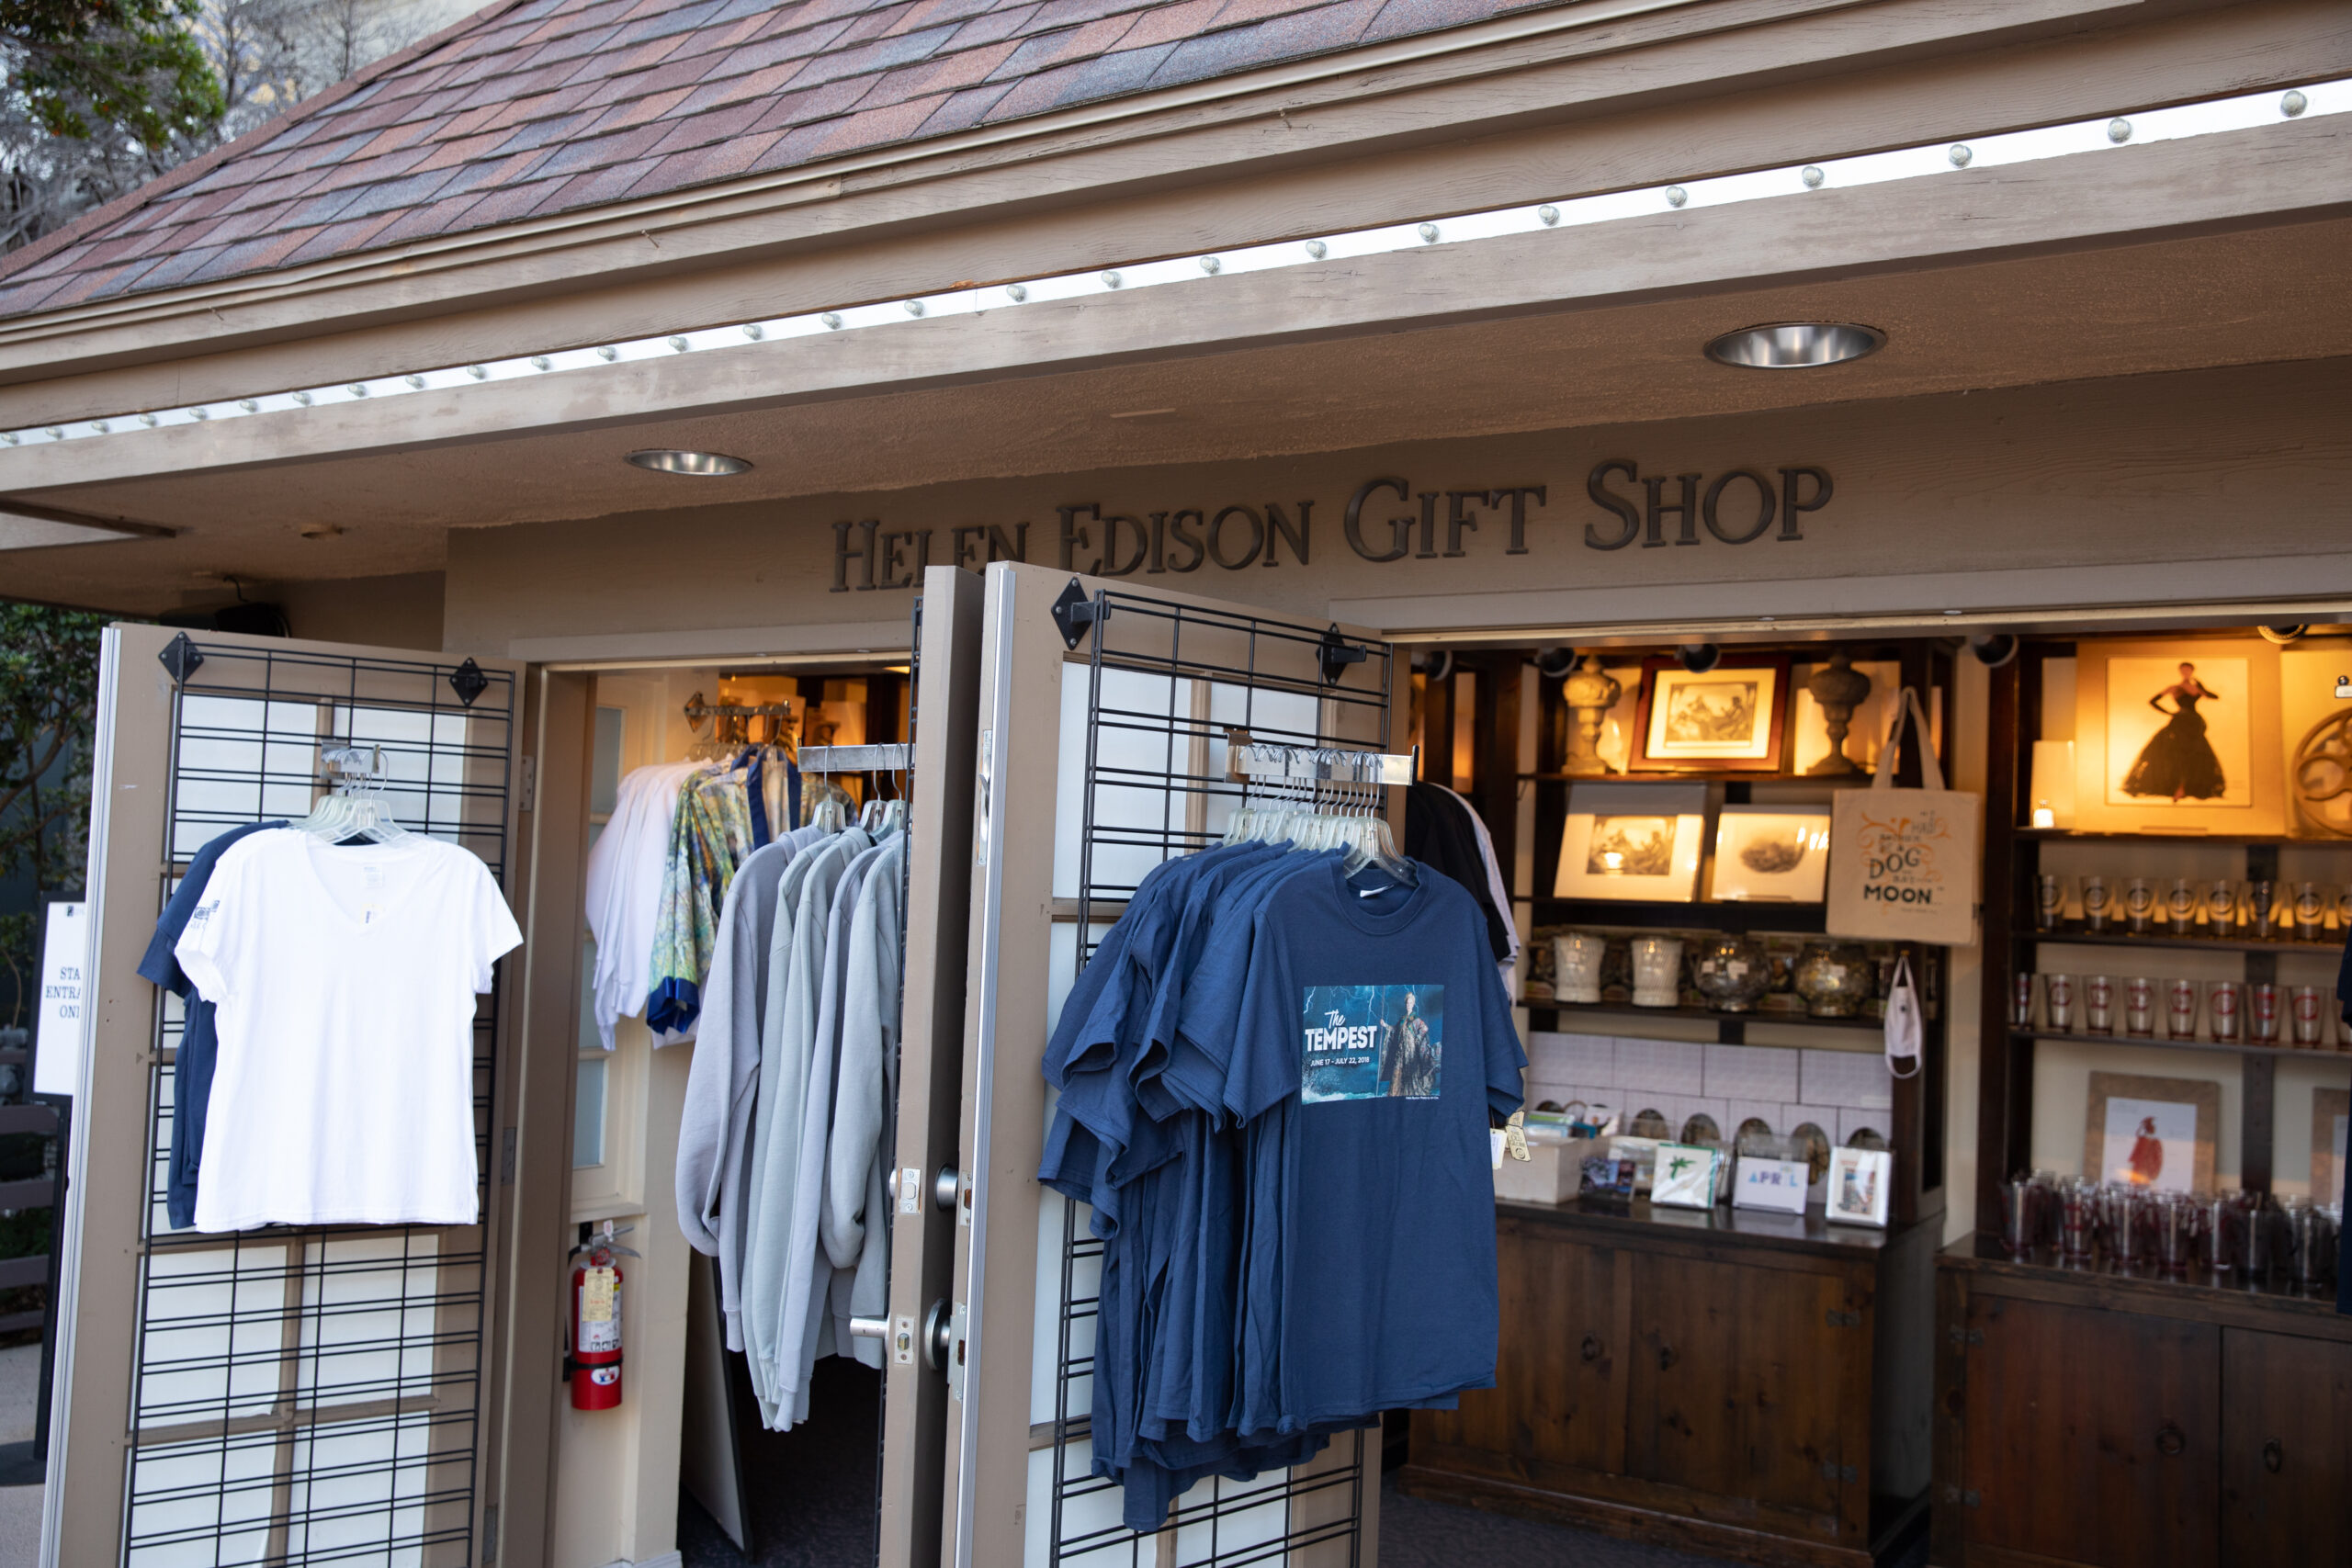 Entrance to the Helen Edison Gift Shop with the doors propped open. T shirts are hung on the doors and pictures, glasses, bags, and other items for purchase are seen on shelves in the the background.